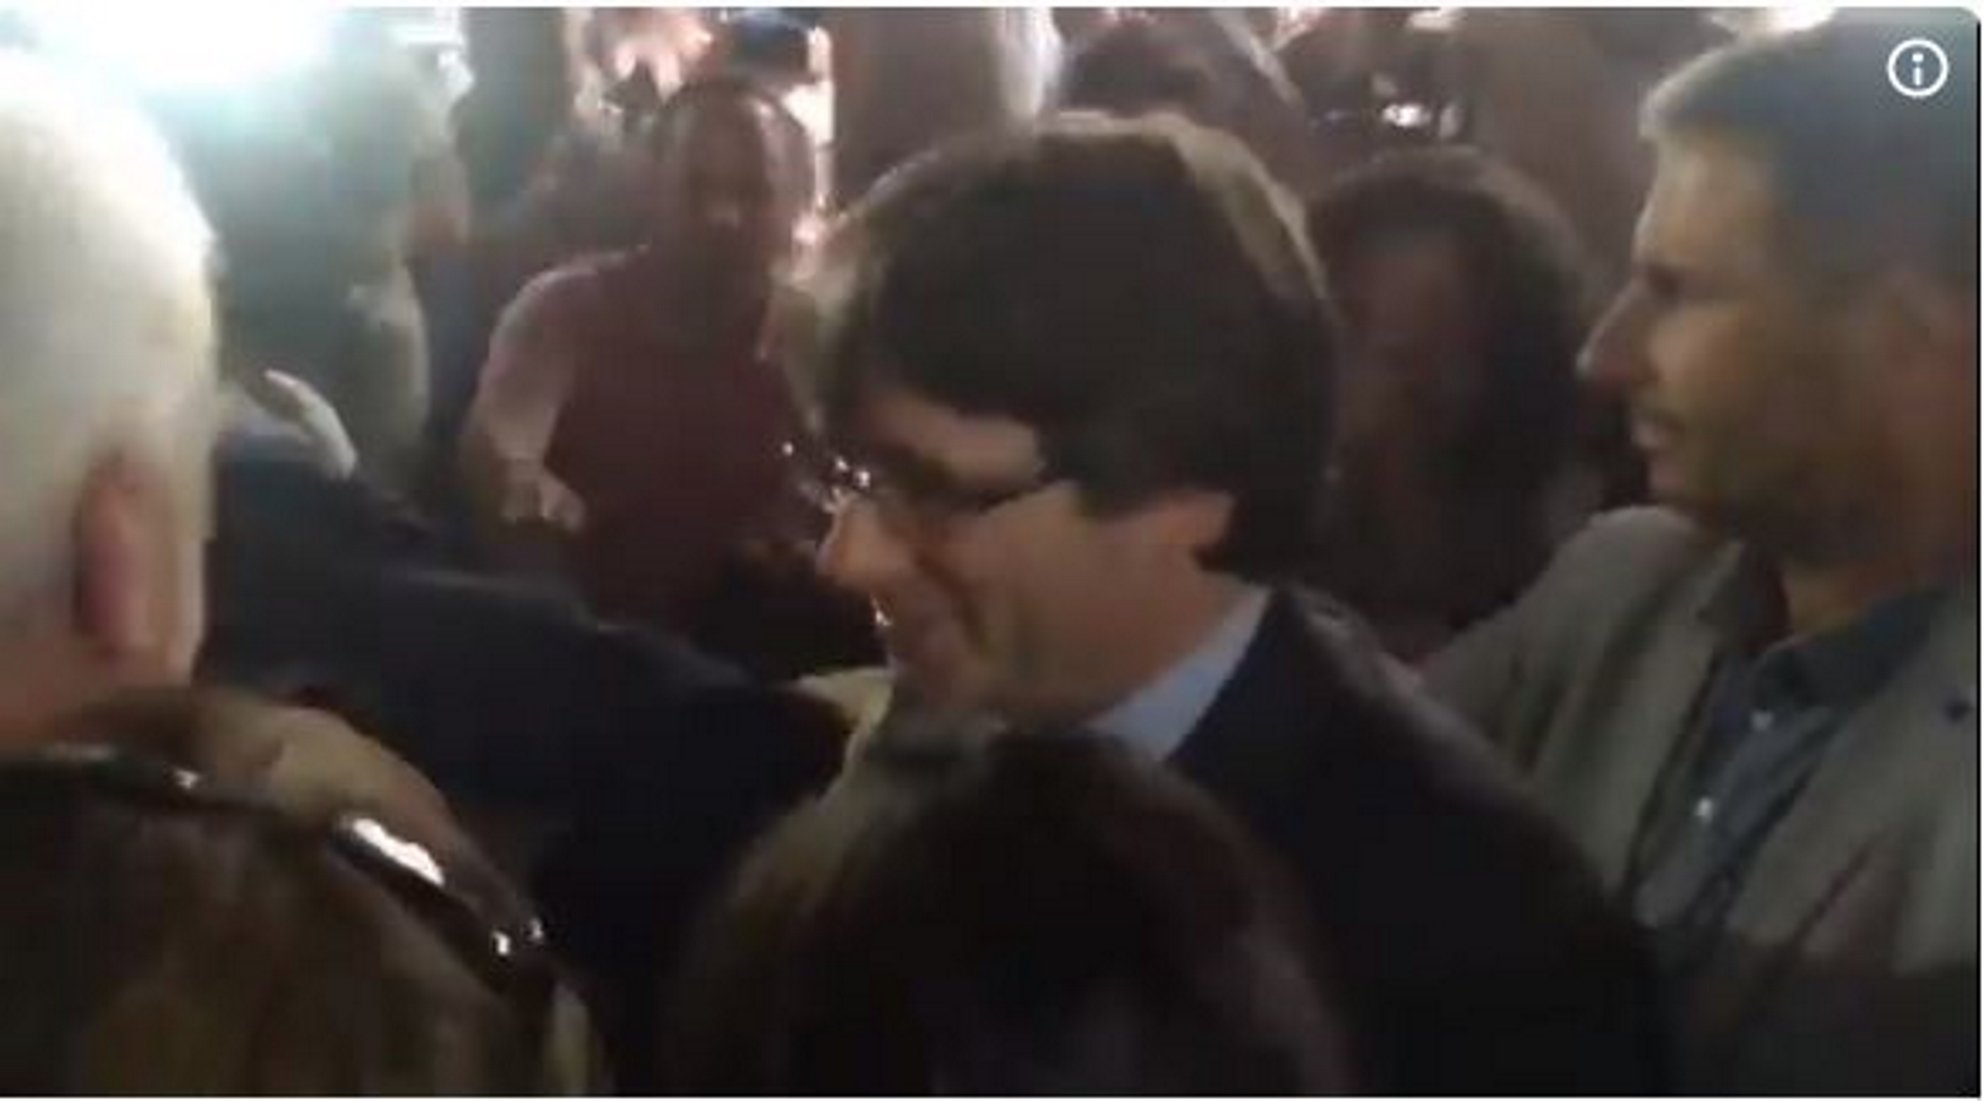 Puigdemont received with chants of "President!" and "Long live the republic!"